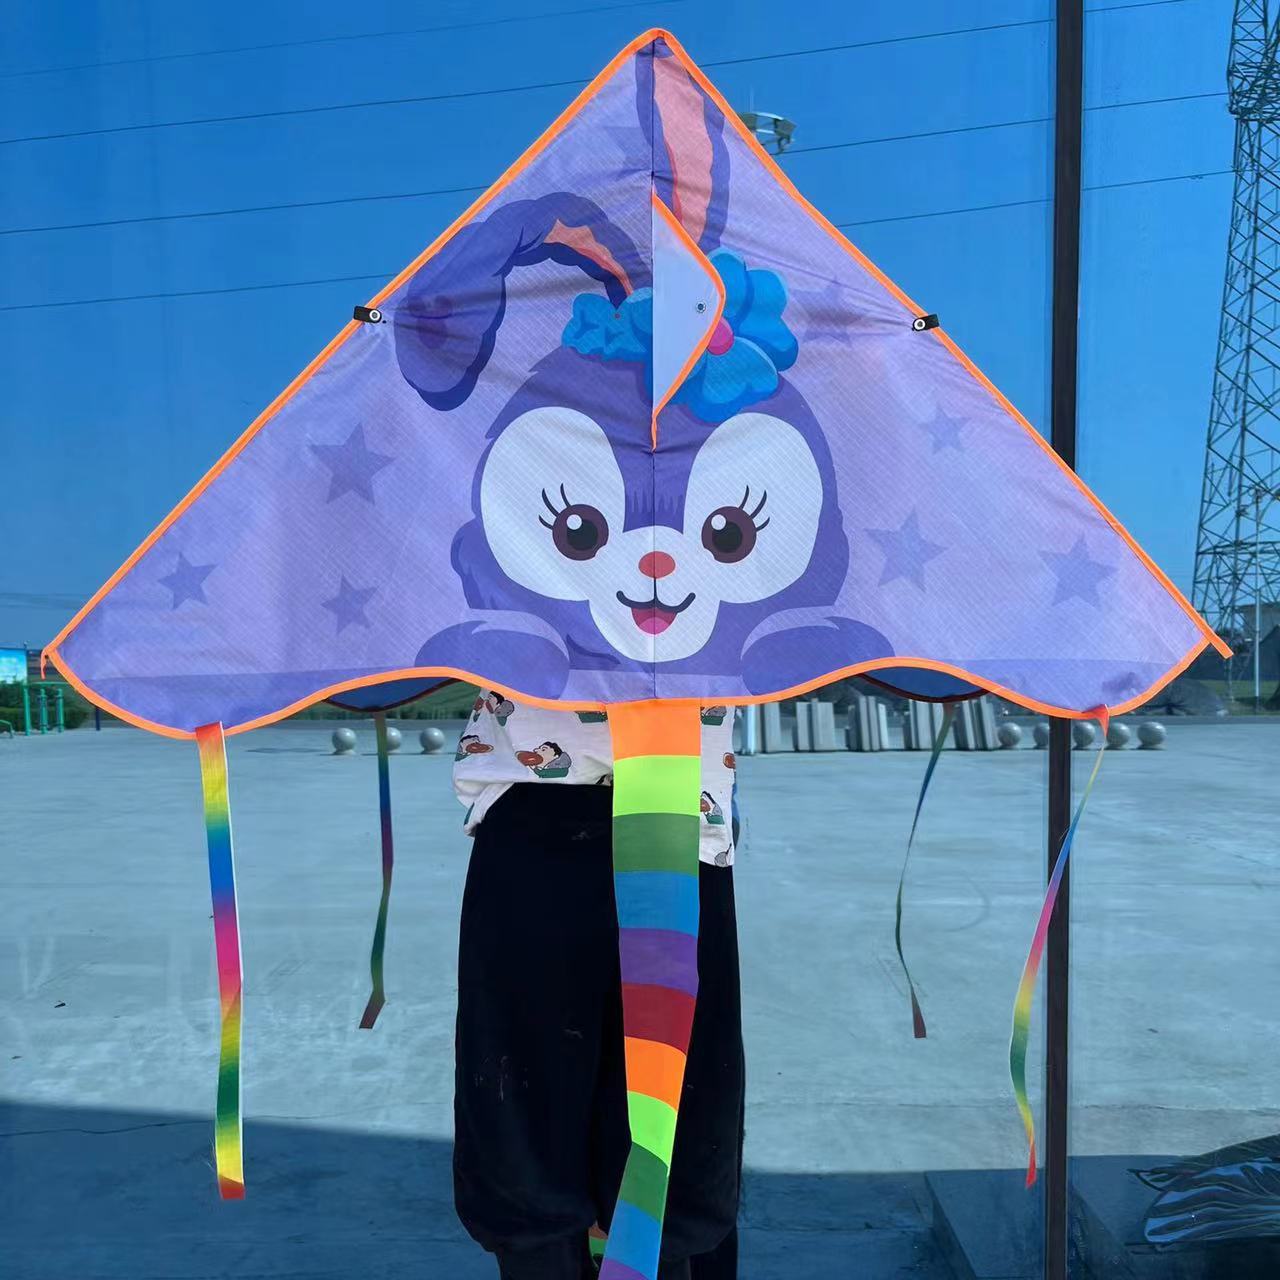 Weifang Cartoon Kite New Bright Cloth Hot Printed Checked Cloth Curved Triangle Kite Kite for Children Internet Celebrity Kite